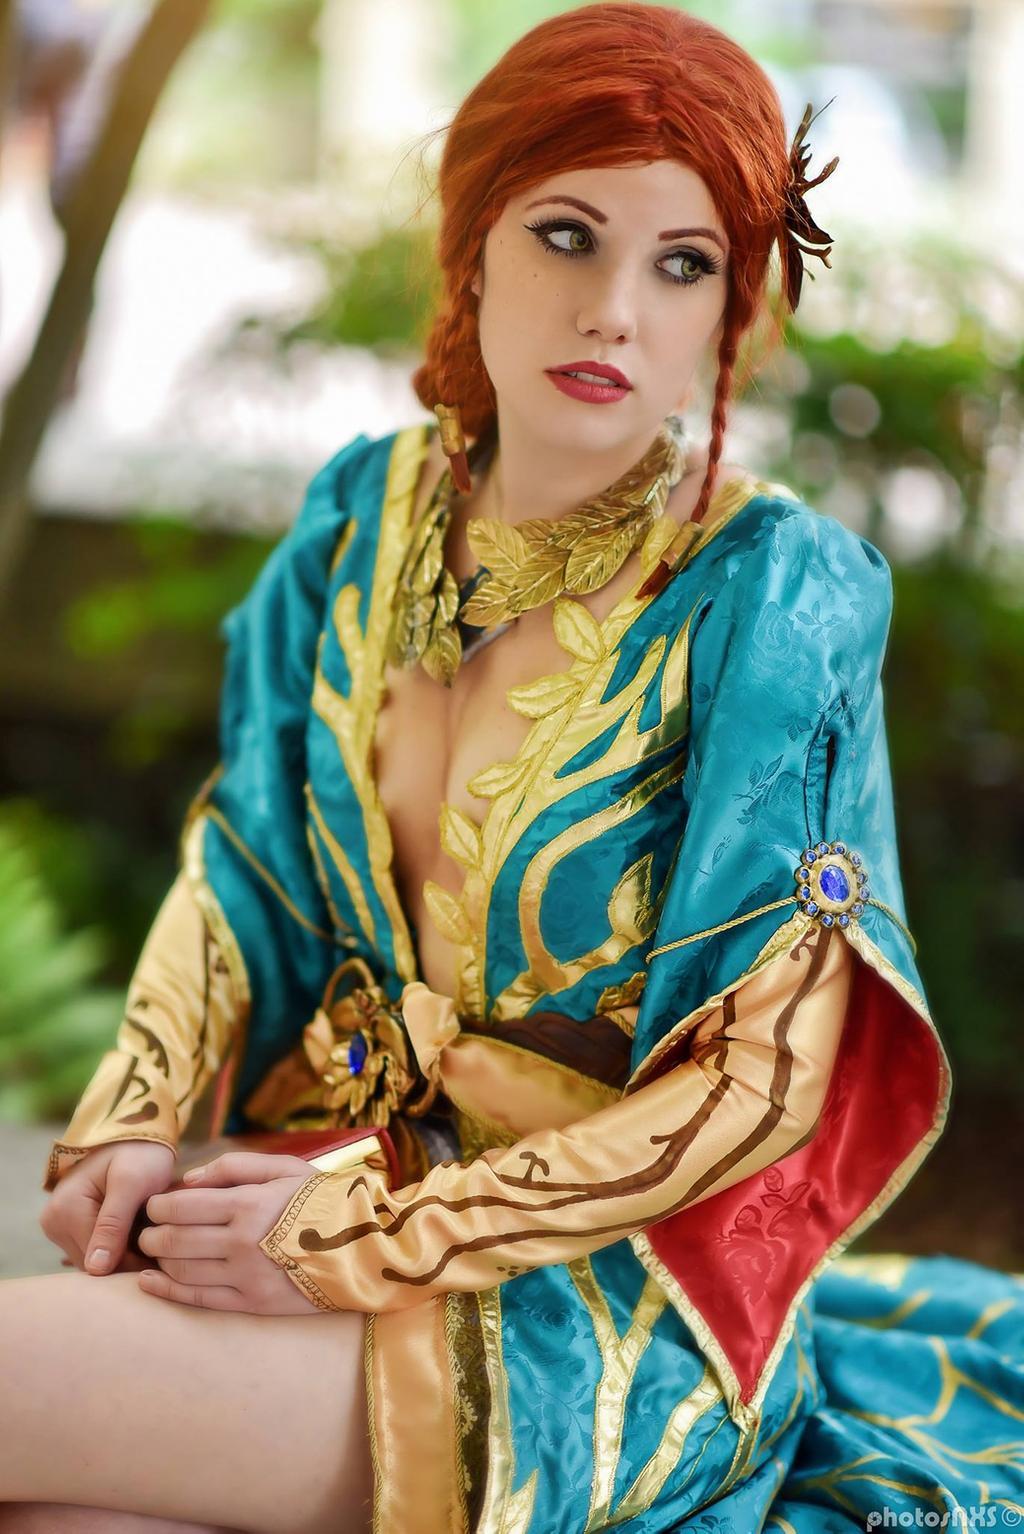 60+ Hot Pictures Of Triss Merigold From The Witcher Series Are Delight For Fans 86